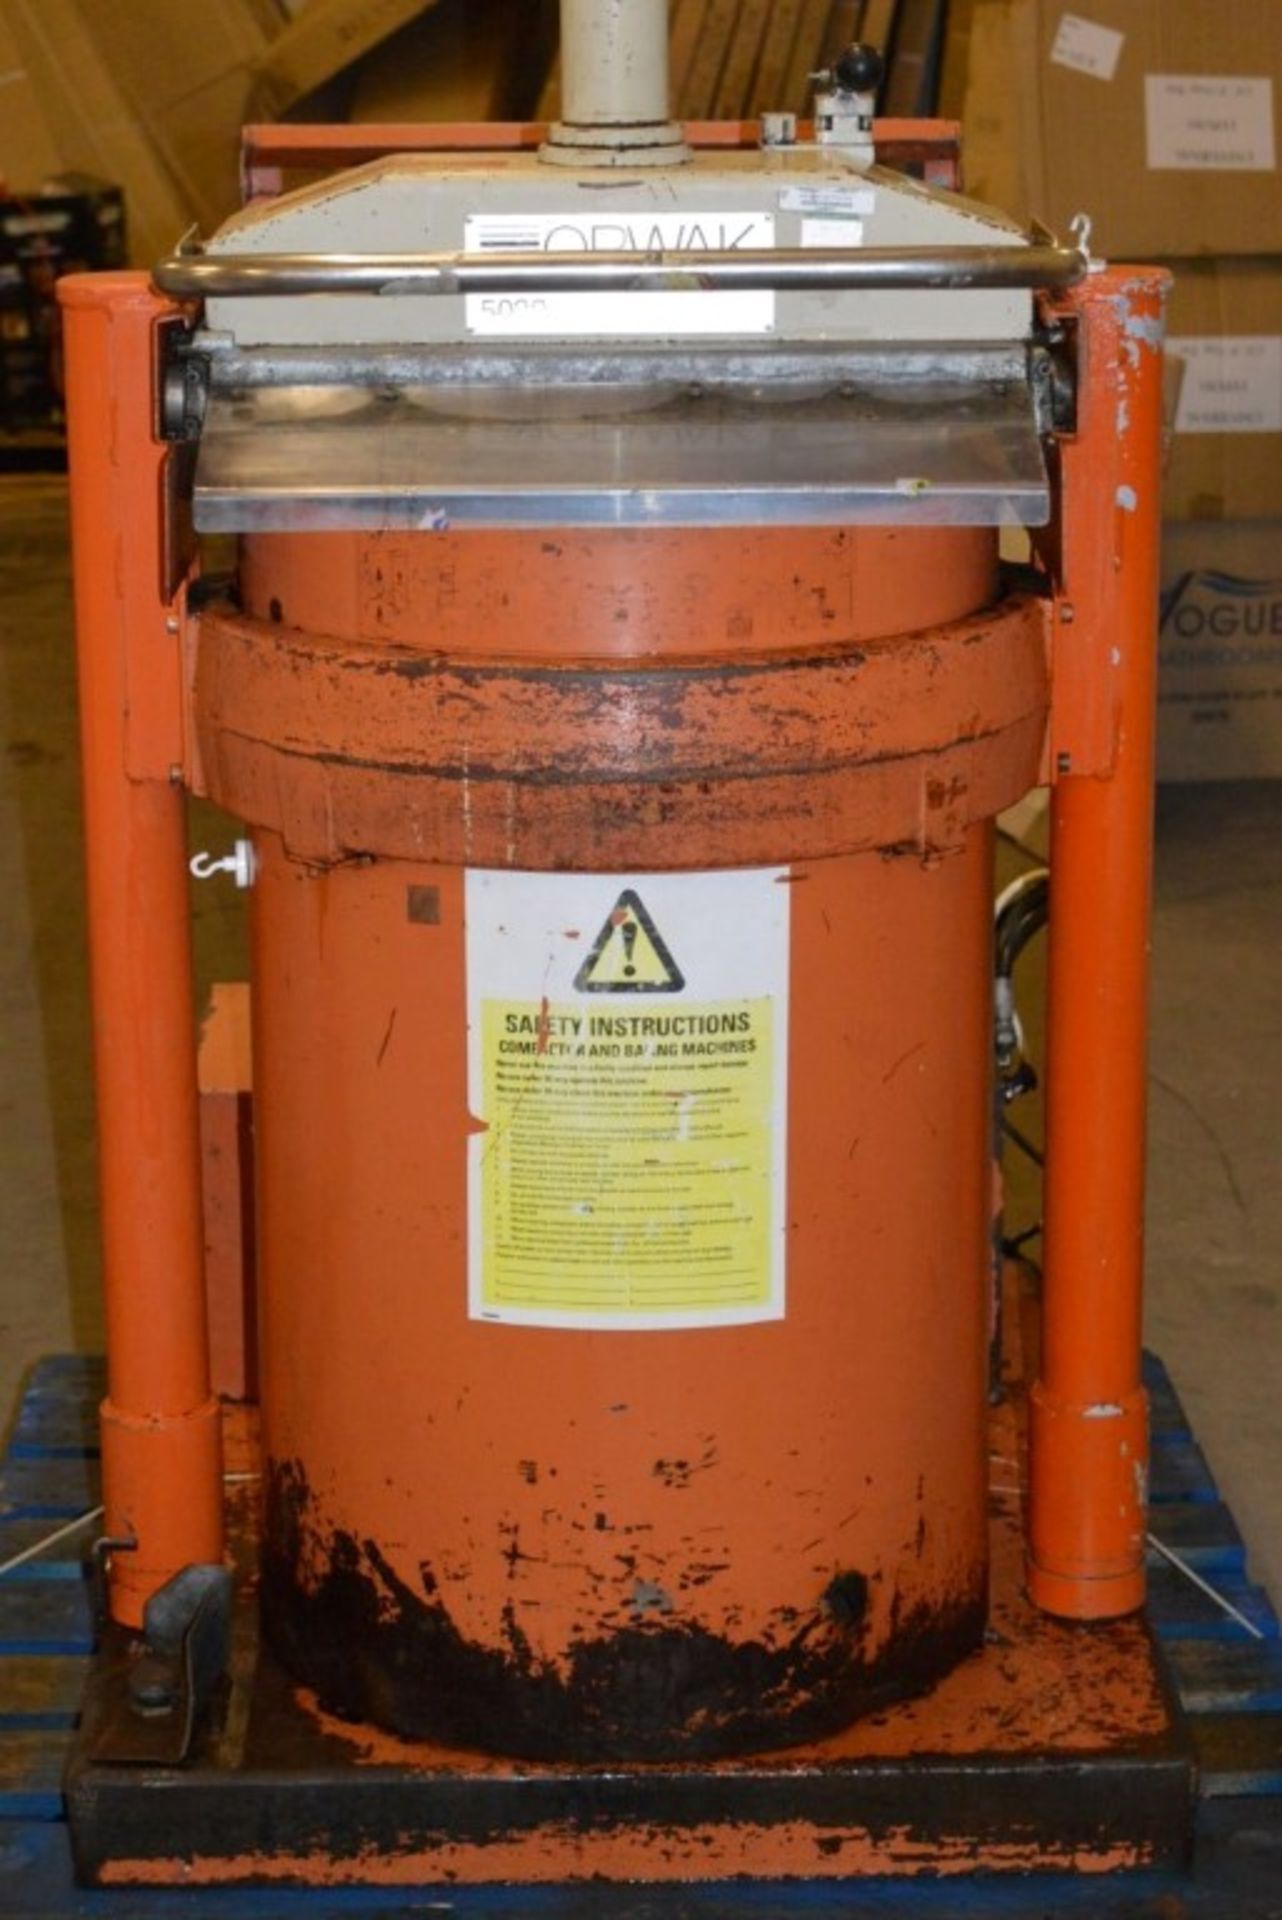 1 x Orwak 5030 Waste Compactor - Used For Compacting Recyclable or Non-Recyclable Waste - - Image 4 of 4